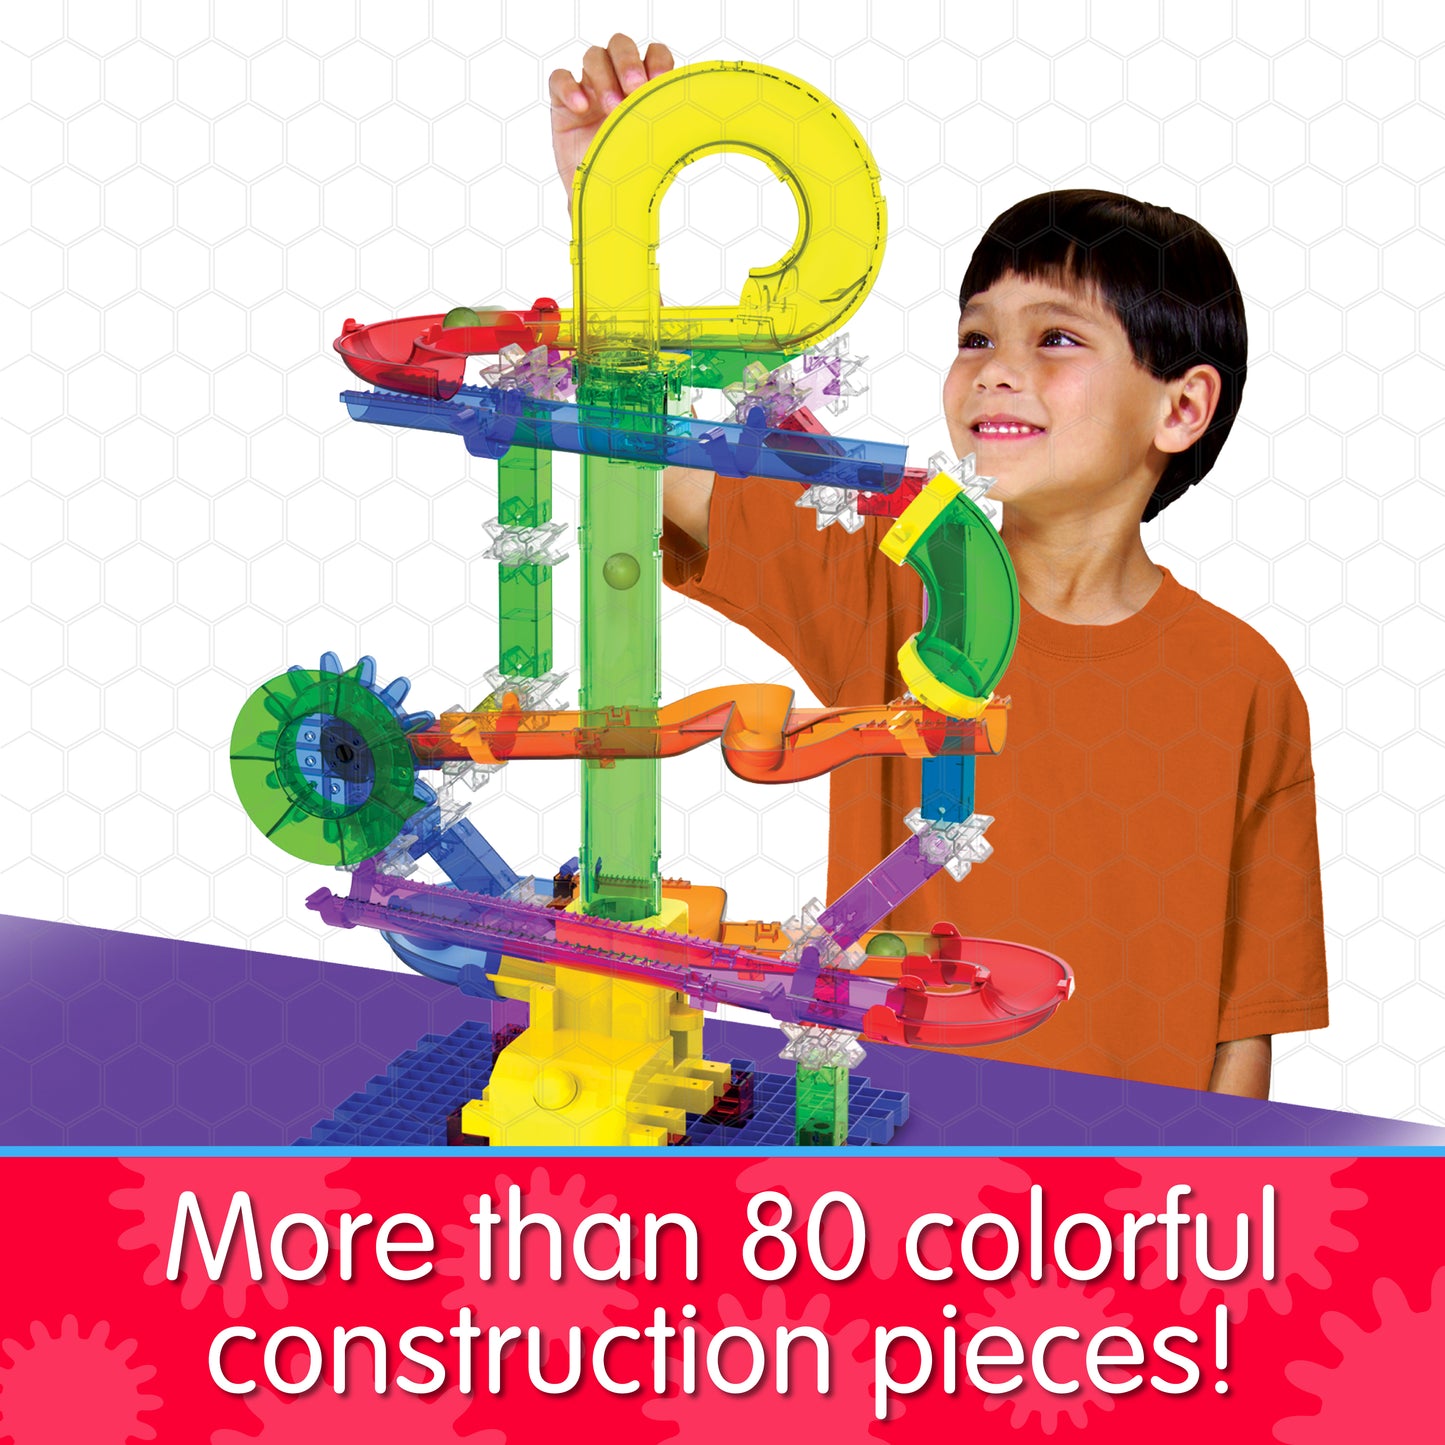 Infographic about Slingshot 3.0 that says, "More than 80 colorful construction pieces!"